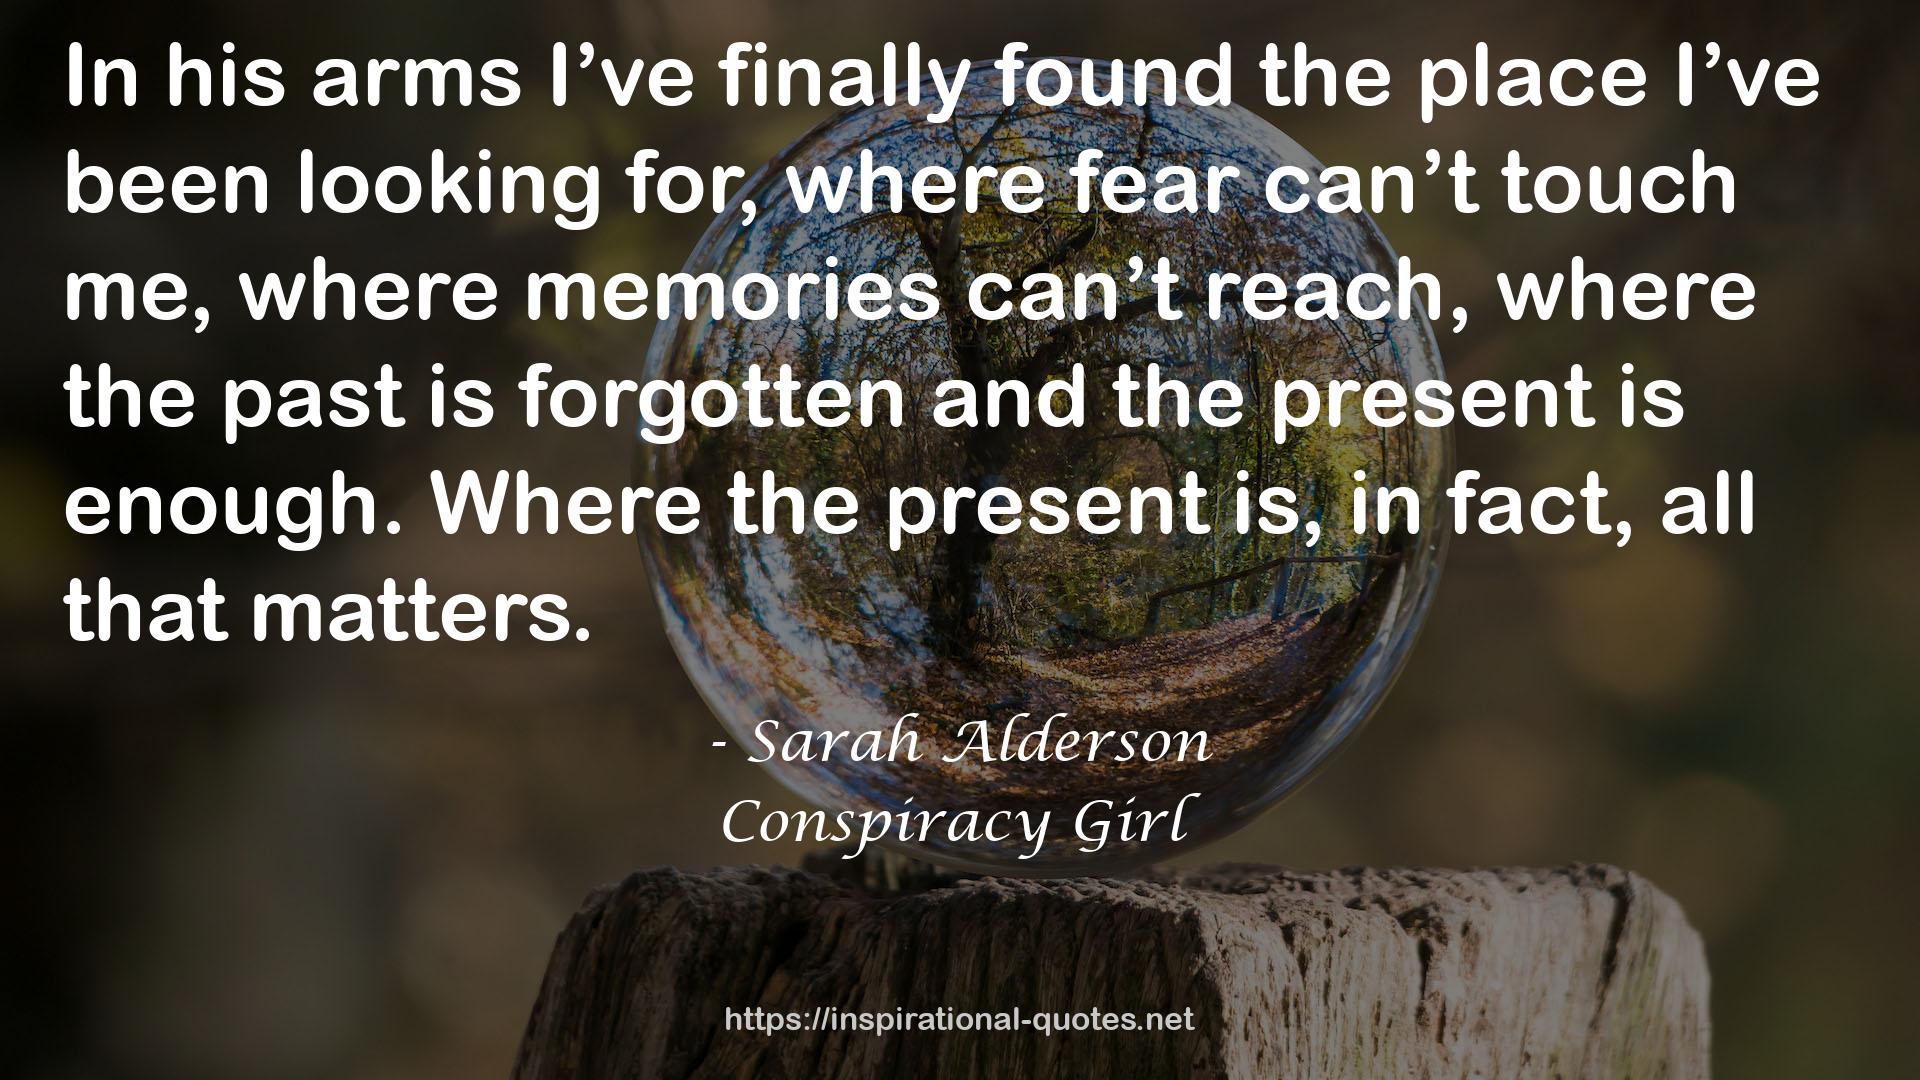 Conspiracy Girl QUOTES